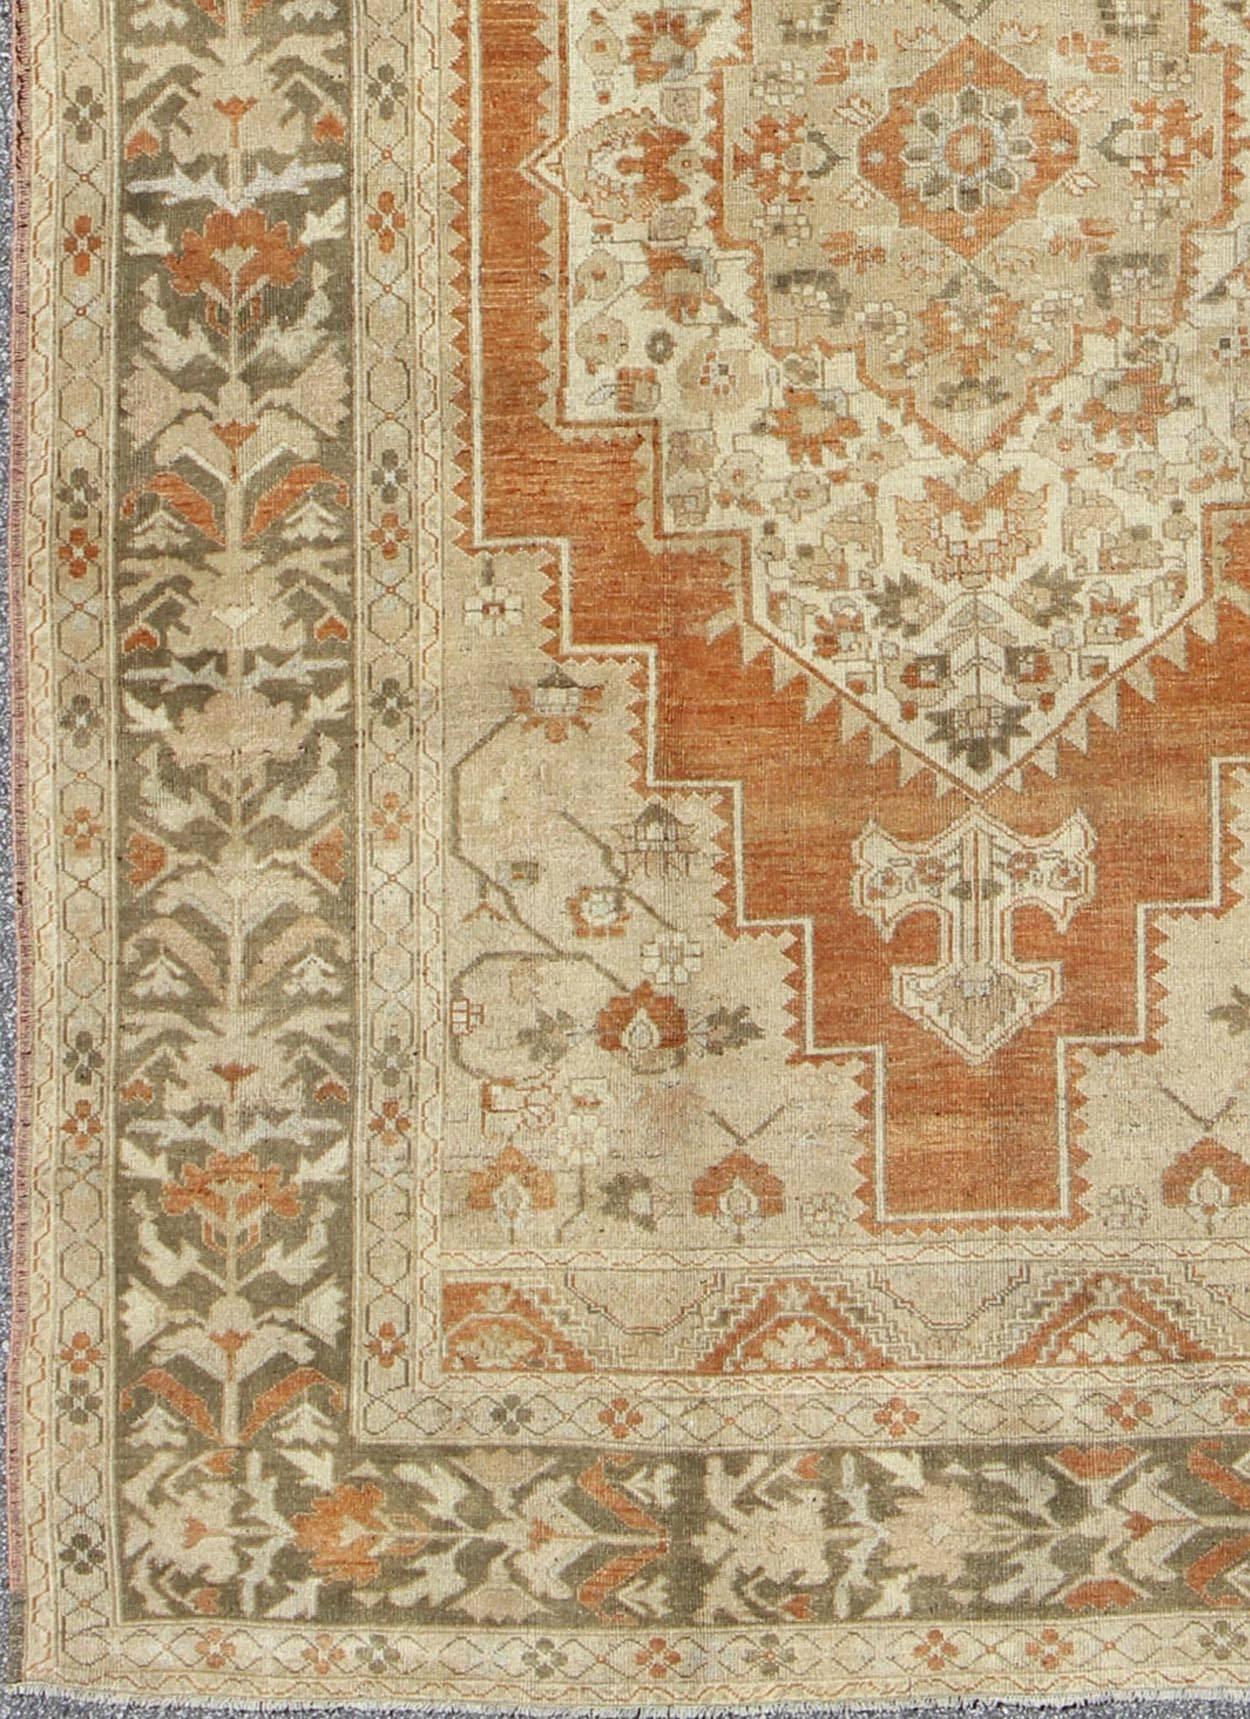 Vintage Turkish Oushak Rug in Rust, Green, Cream, Tape and Neutral Colors.
This beautiful Turkish Oushak rug, handwoven in Turkey, beautifully integrates neutral compositions. This rug features an exquisite geometric design with a large central